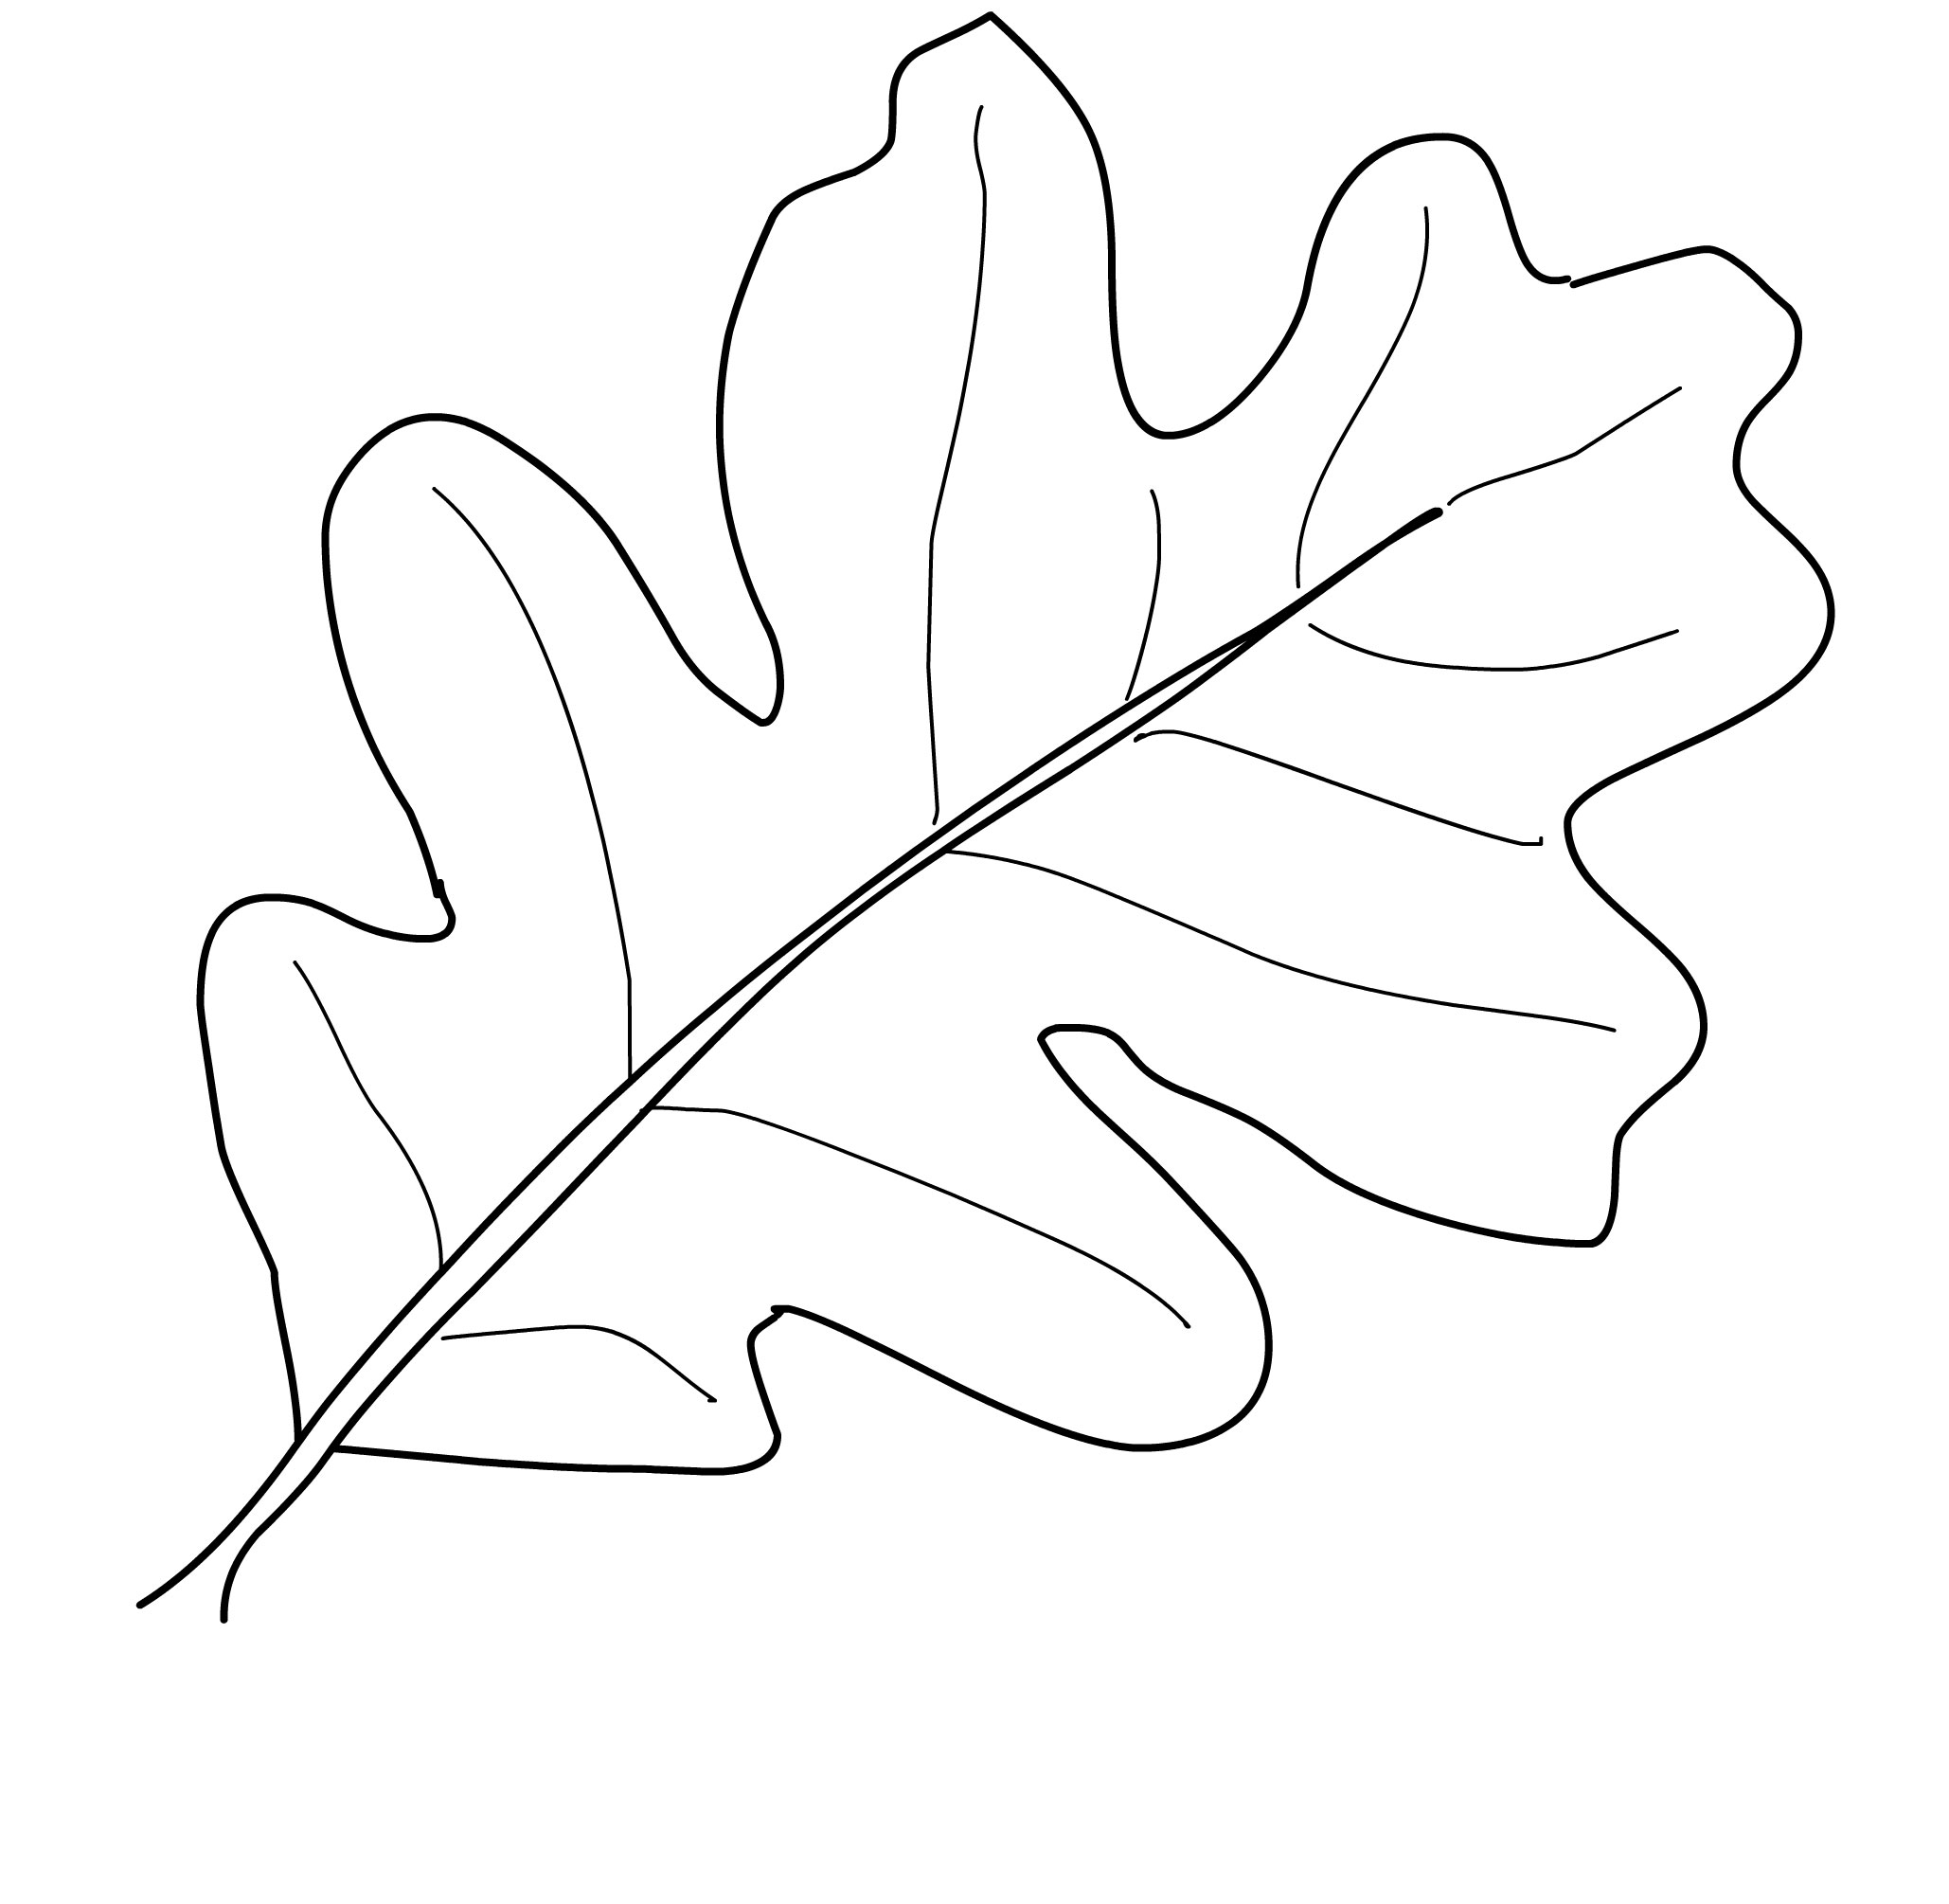 Leaves Coloring Pages Download